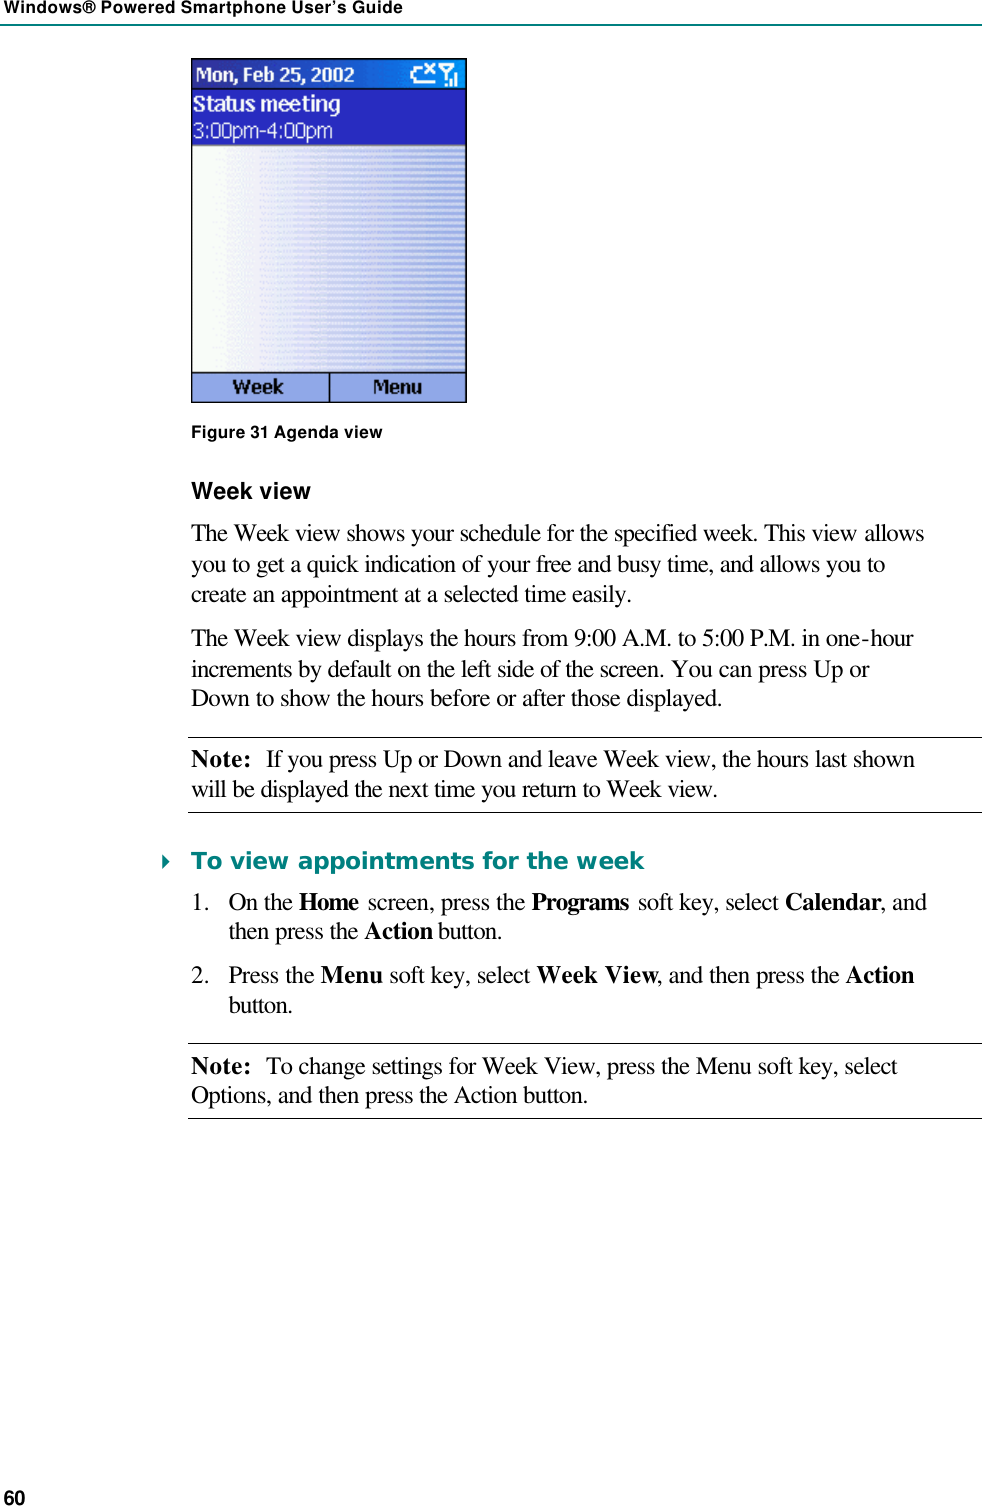 Windows® Powered Smartphone User’s Guide 60  Figure 31 Agenda view Week view The Week view shows your schedule for the specified week. This view allows you to get a quick indication of your free and busy time, and allows you to create an appointment at a selected time easily.  The Week view displays the hours from 9:00 A.M. to 5:00 P.M. in one-hour increments by default on the left side of the screen. You can press Up or Down to show the hours before or after those displayed. Note: If you press Up or Down and leave Week view, the hours last shown will be displayed the next time you return to Week view. 4 To view appointments for the week 1.  On the Home screen, press the Programs soft key, select Calendar, and then press the Action button. 2.  Press the Menu soft key, select Week View, and then press the Action button. Note: To change settings for Week View, press the Menu soft key, select Options, and then press the Action button. 